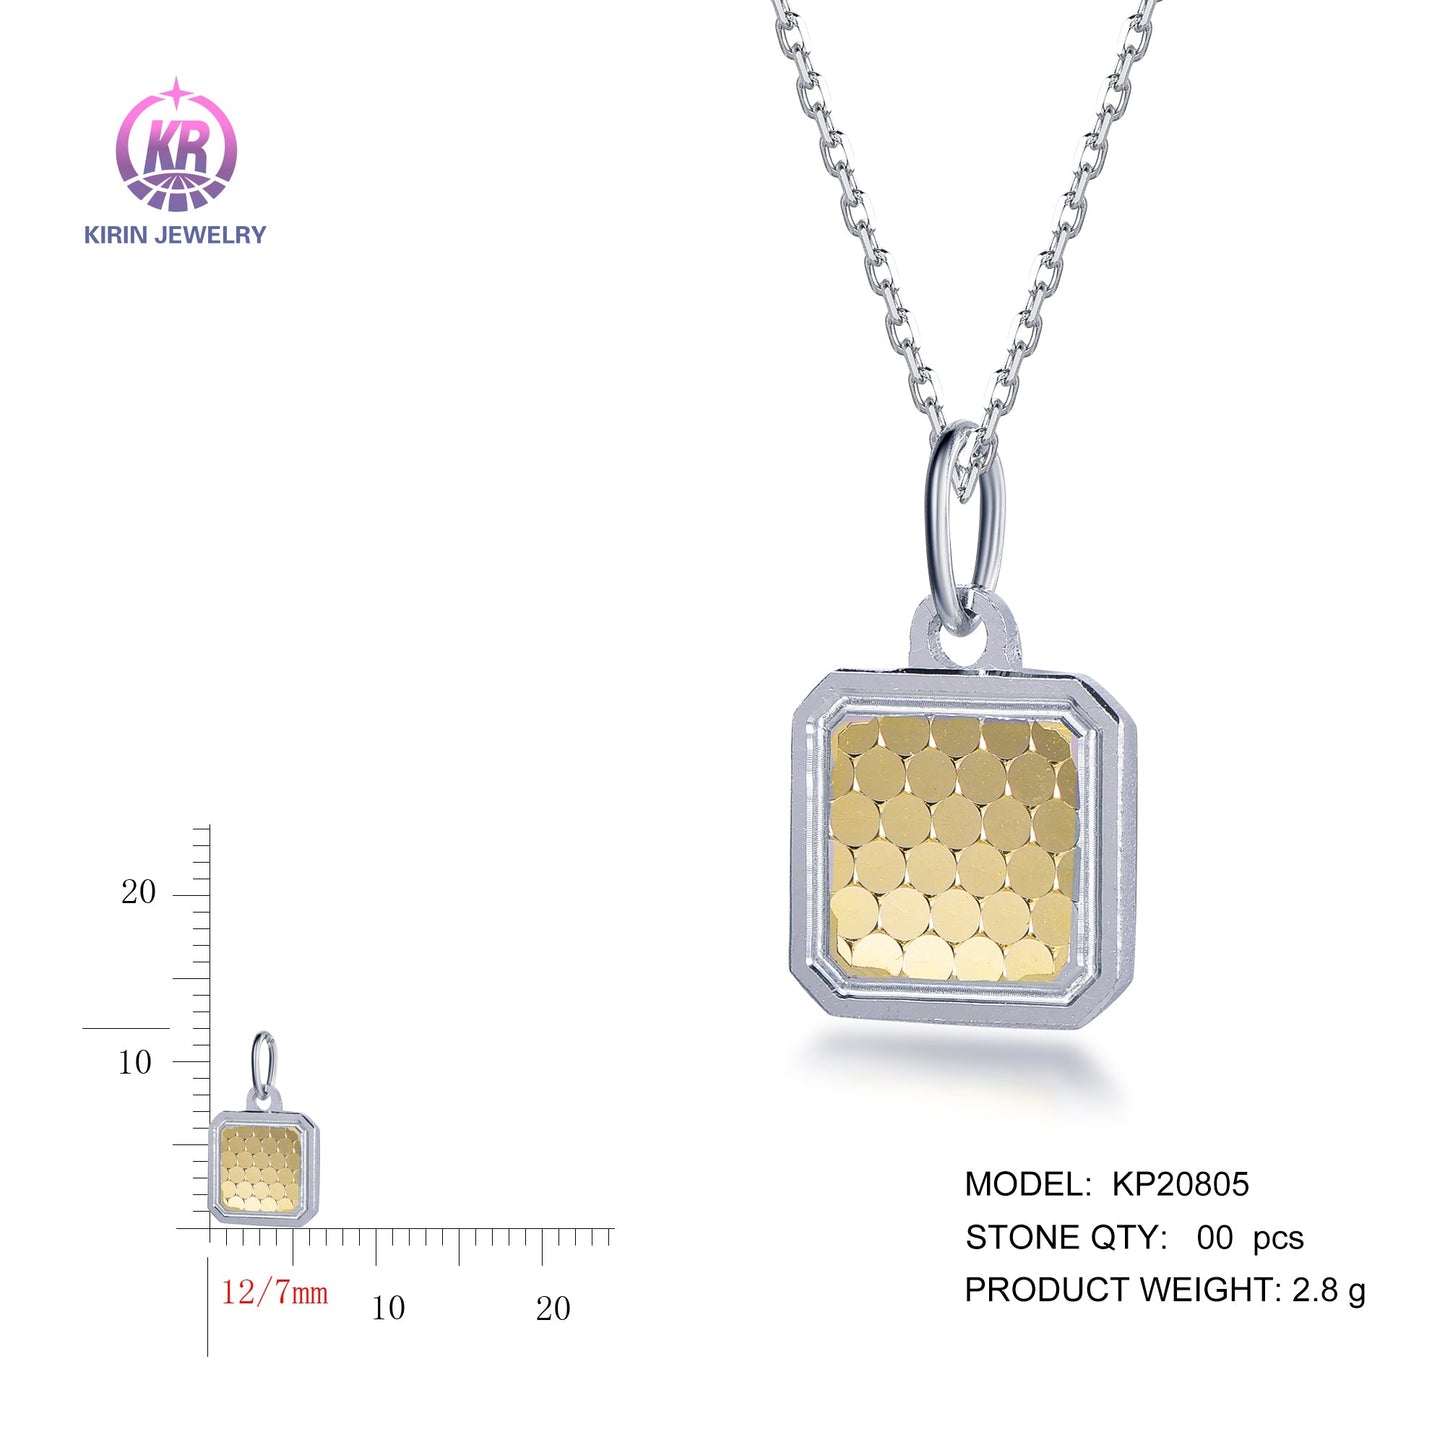 925 silver pendant with 2-tone plating rhodium and 14K gold KP20805 Kirin Jewelry